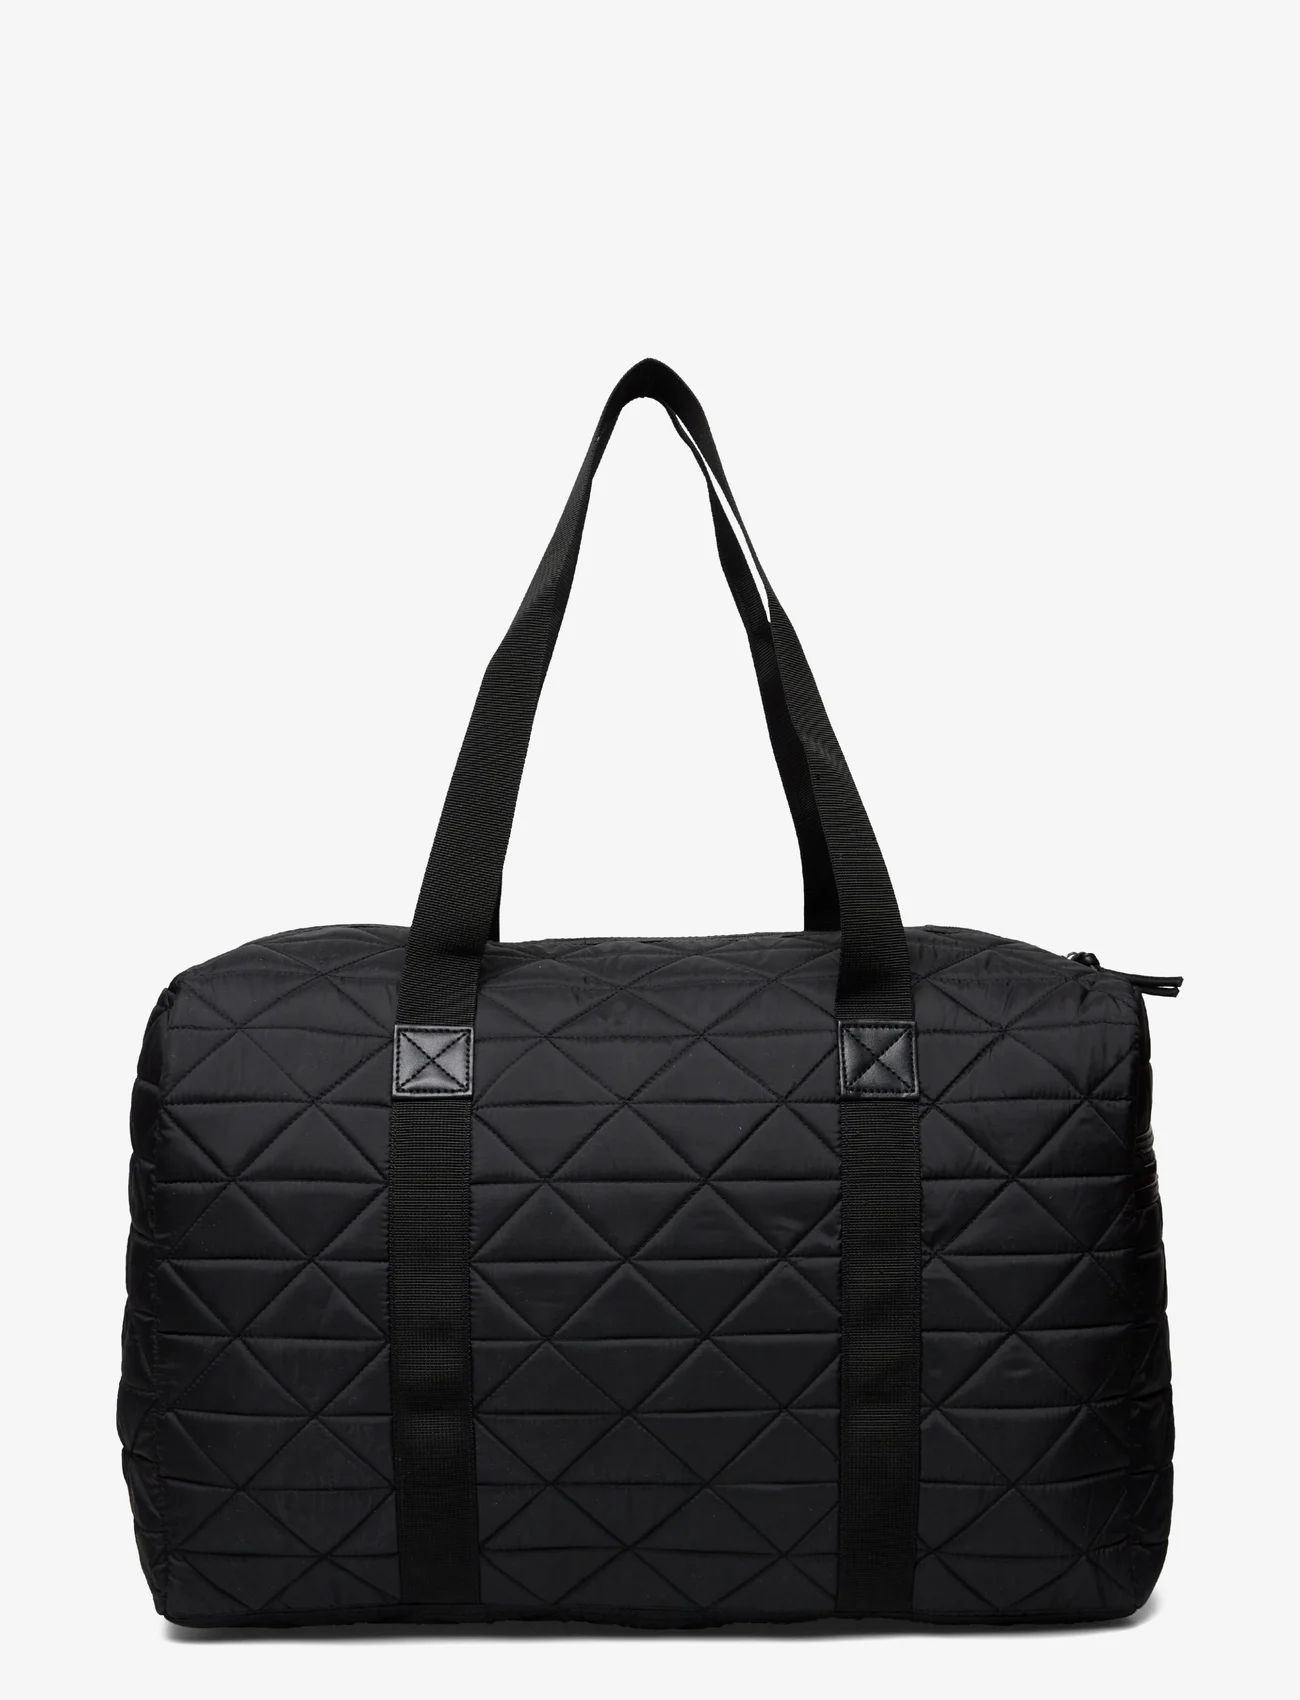 DAY et - Day Gweneth RE-Q Boxin Sporty - black - 1